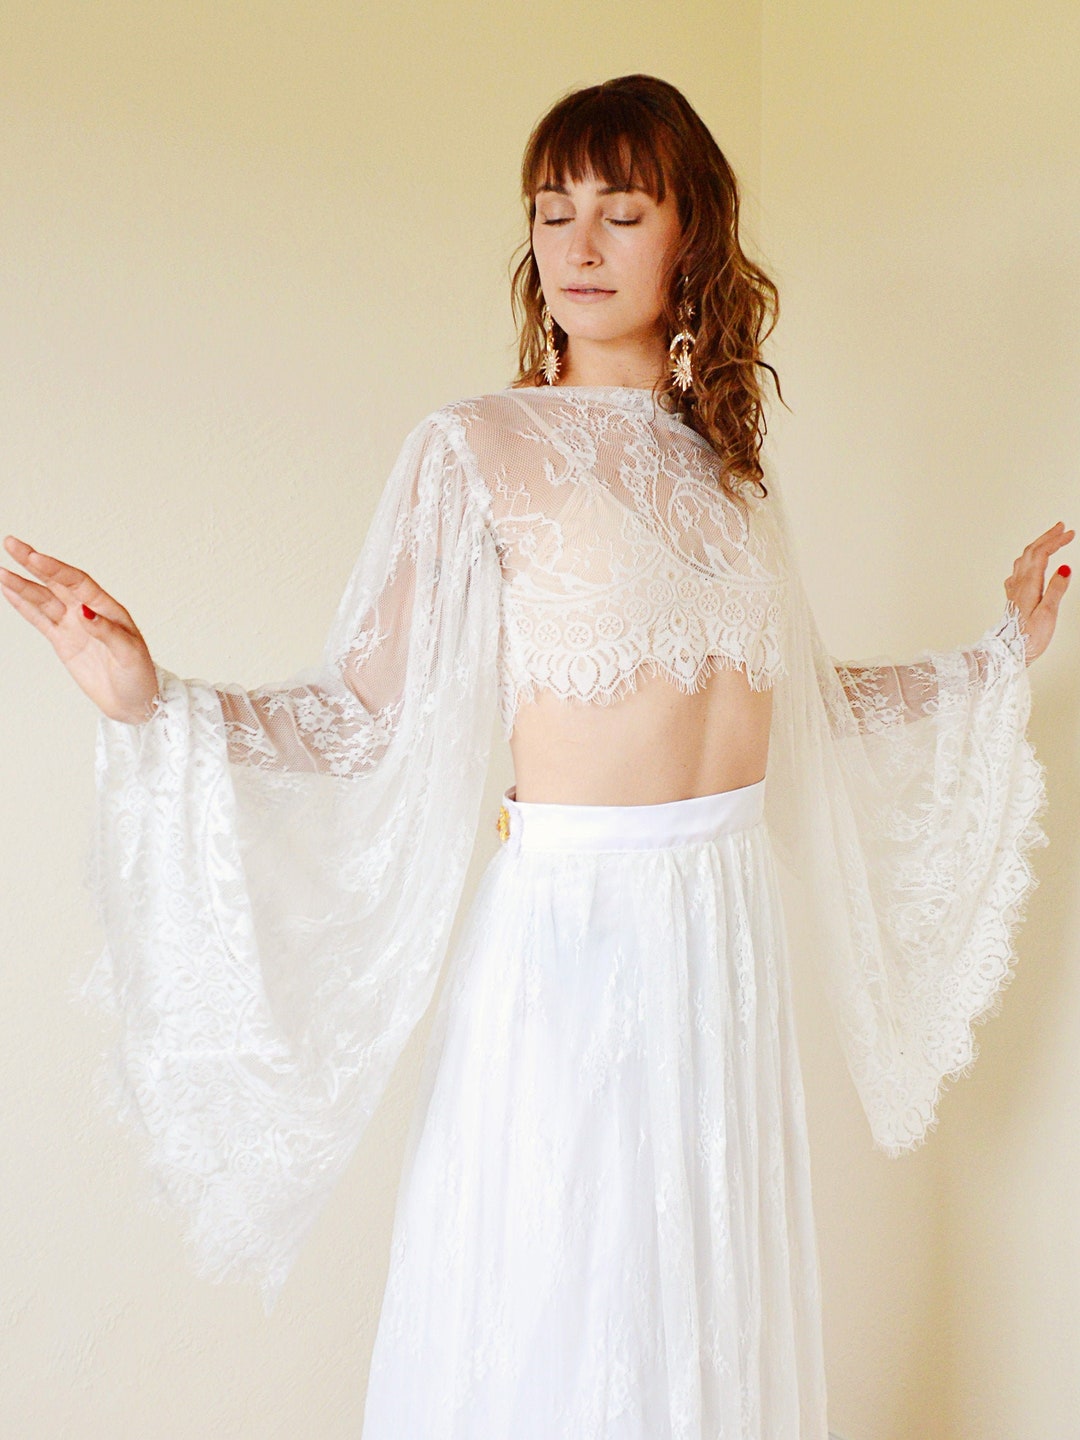 Lace Crop Tops, White Lace Crop Tops